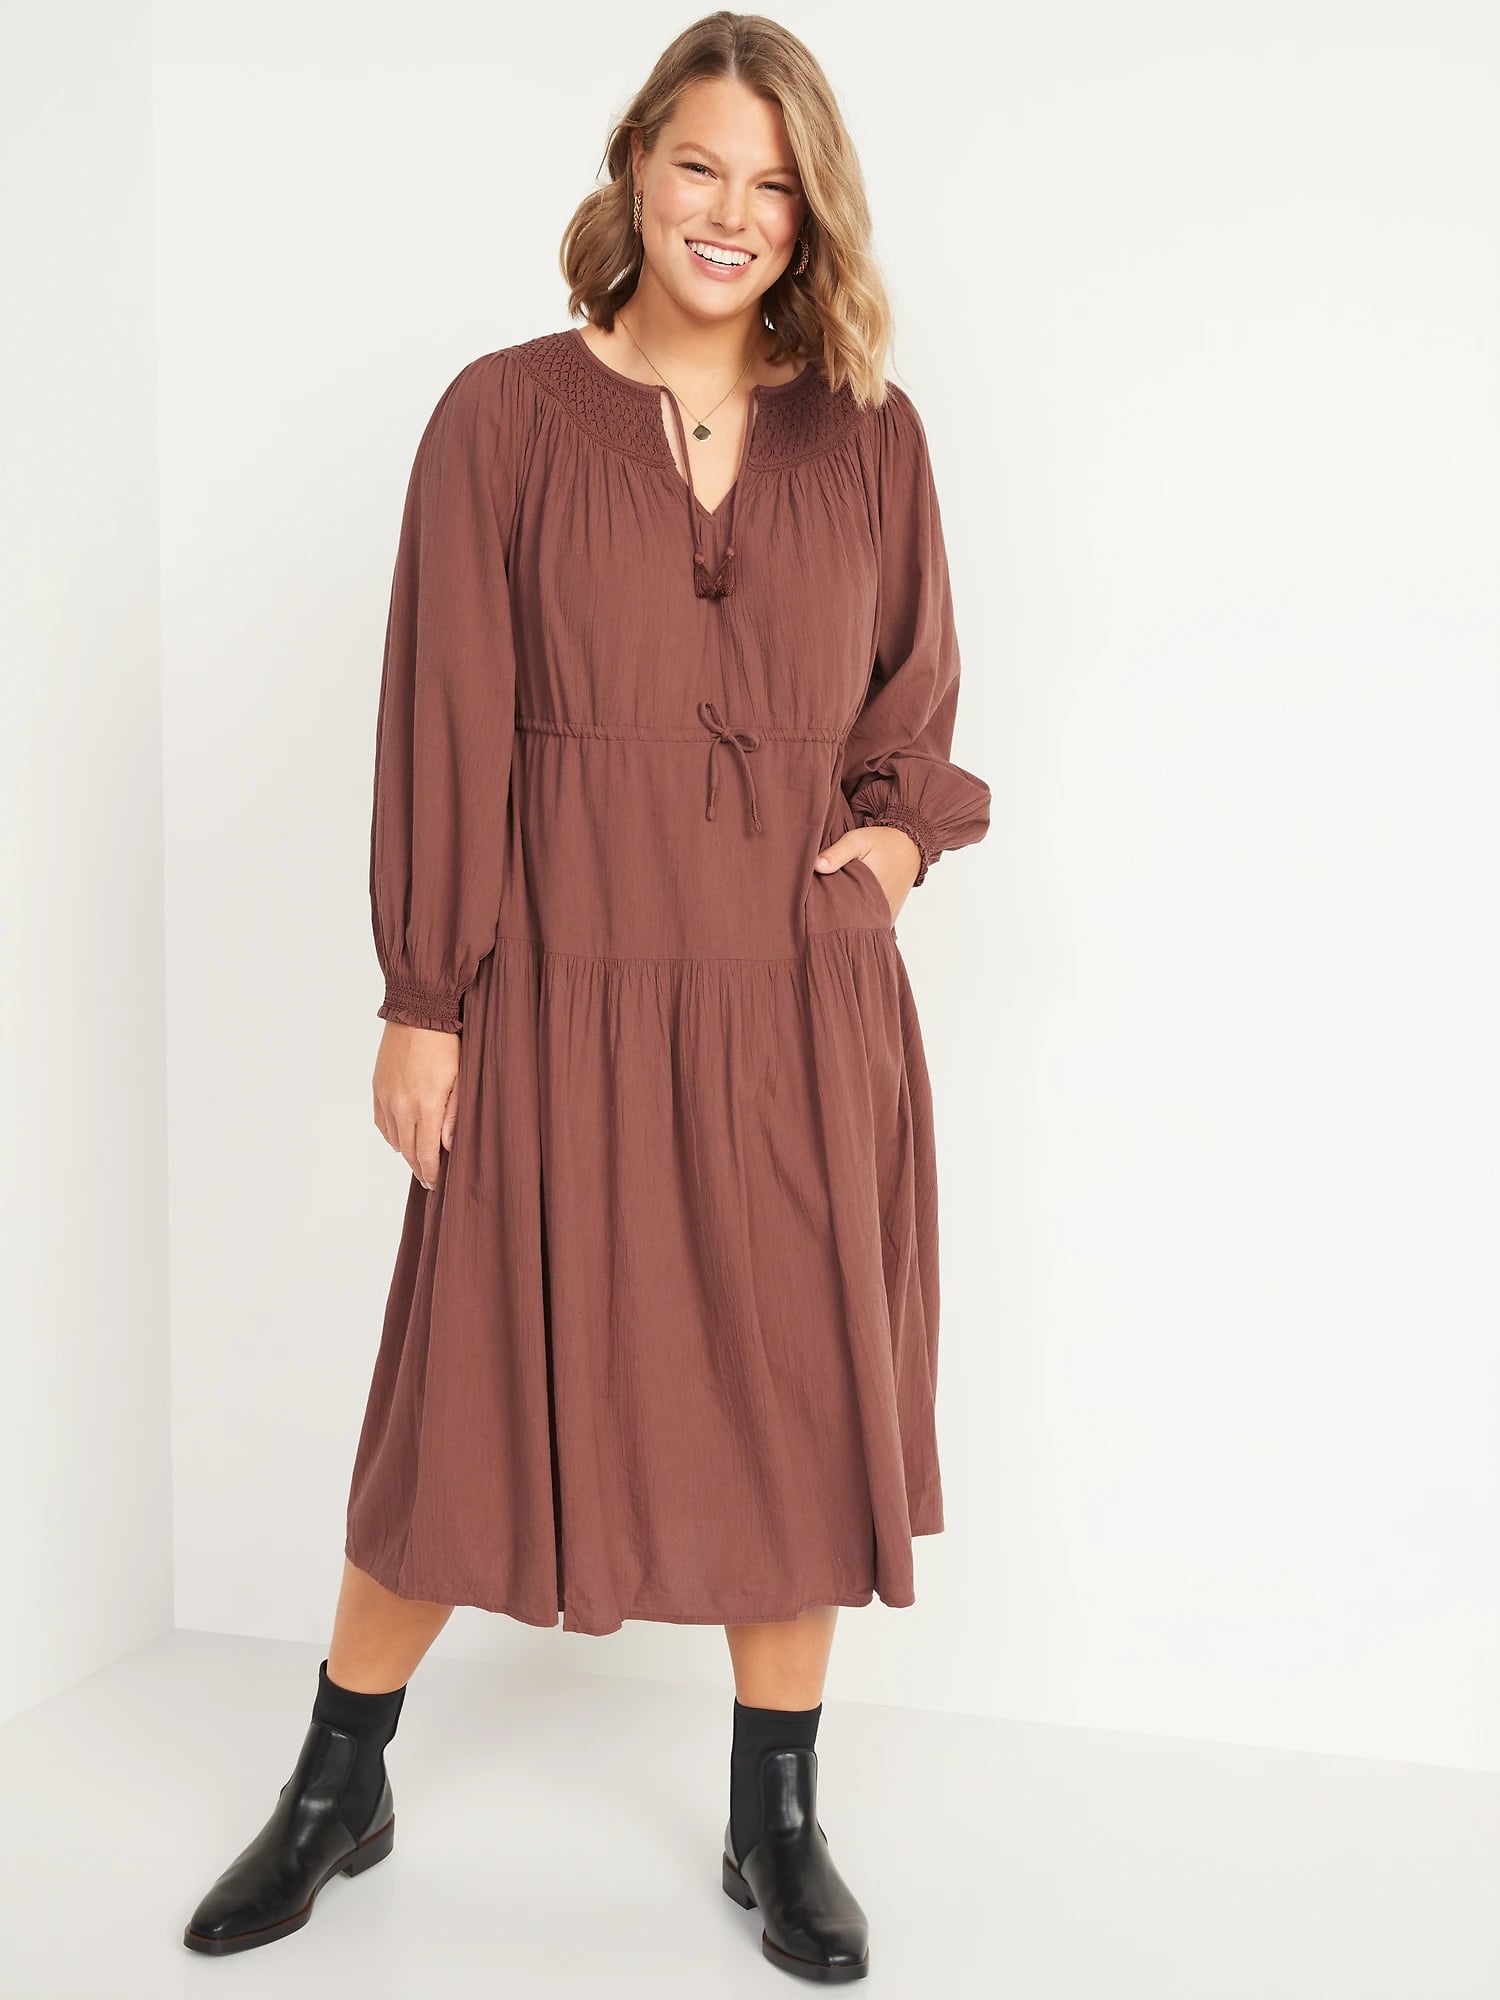 Best Long-Sleeved Dresses From Old Navy ...